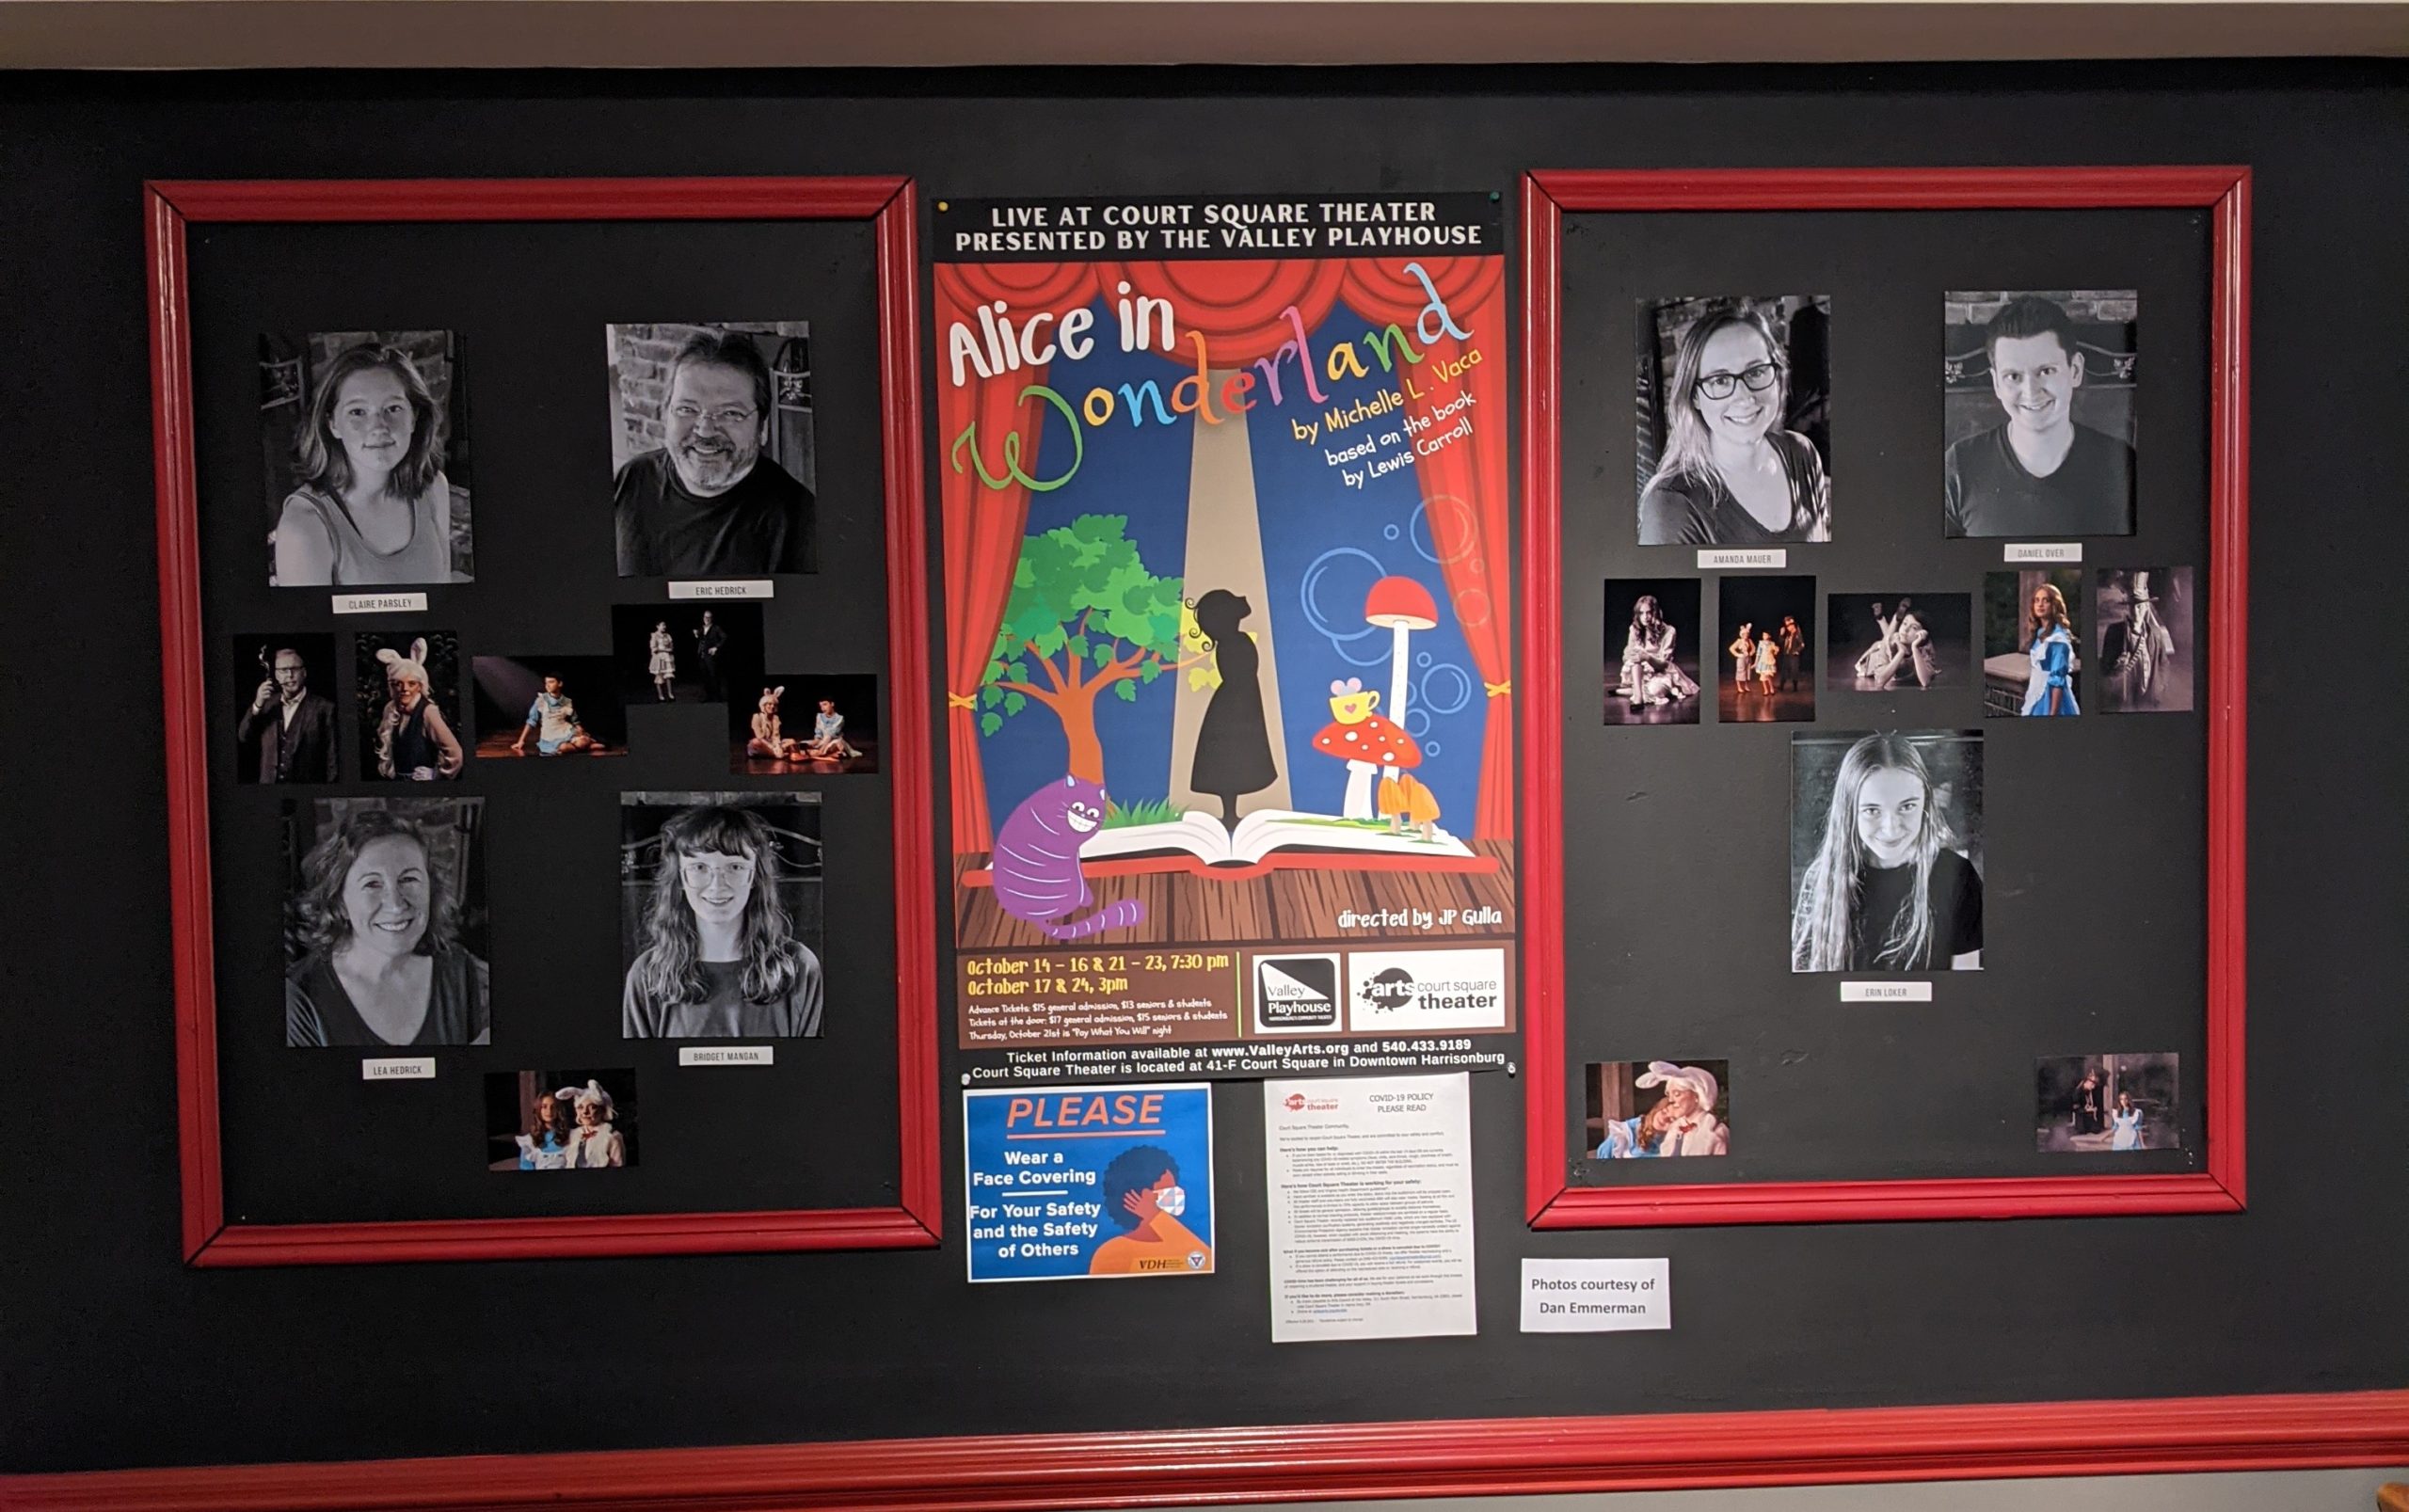 A poster showing the cast of the Valley Theater production of Alice and Wonderland, showing large black and white photos of each cast member